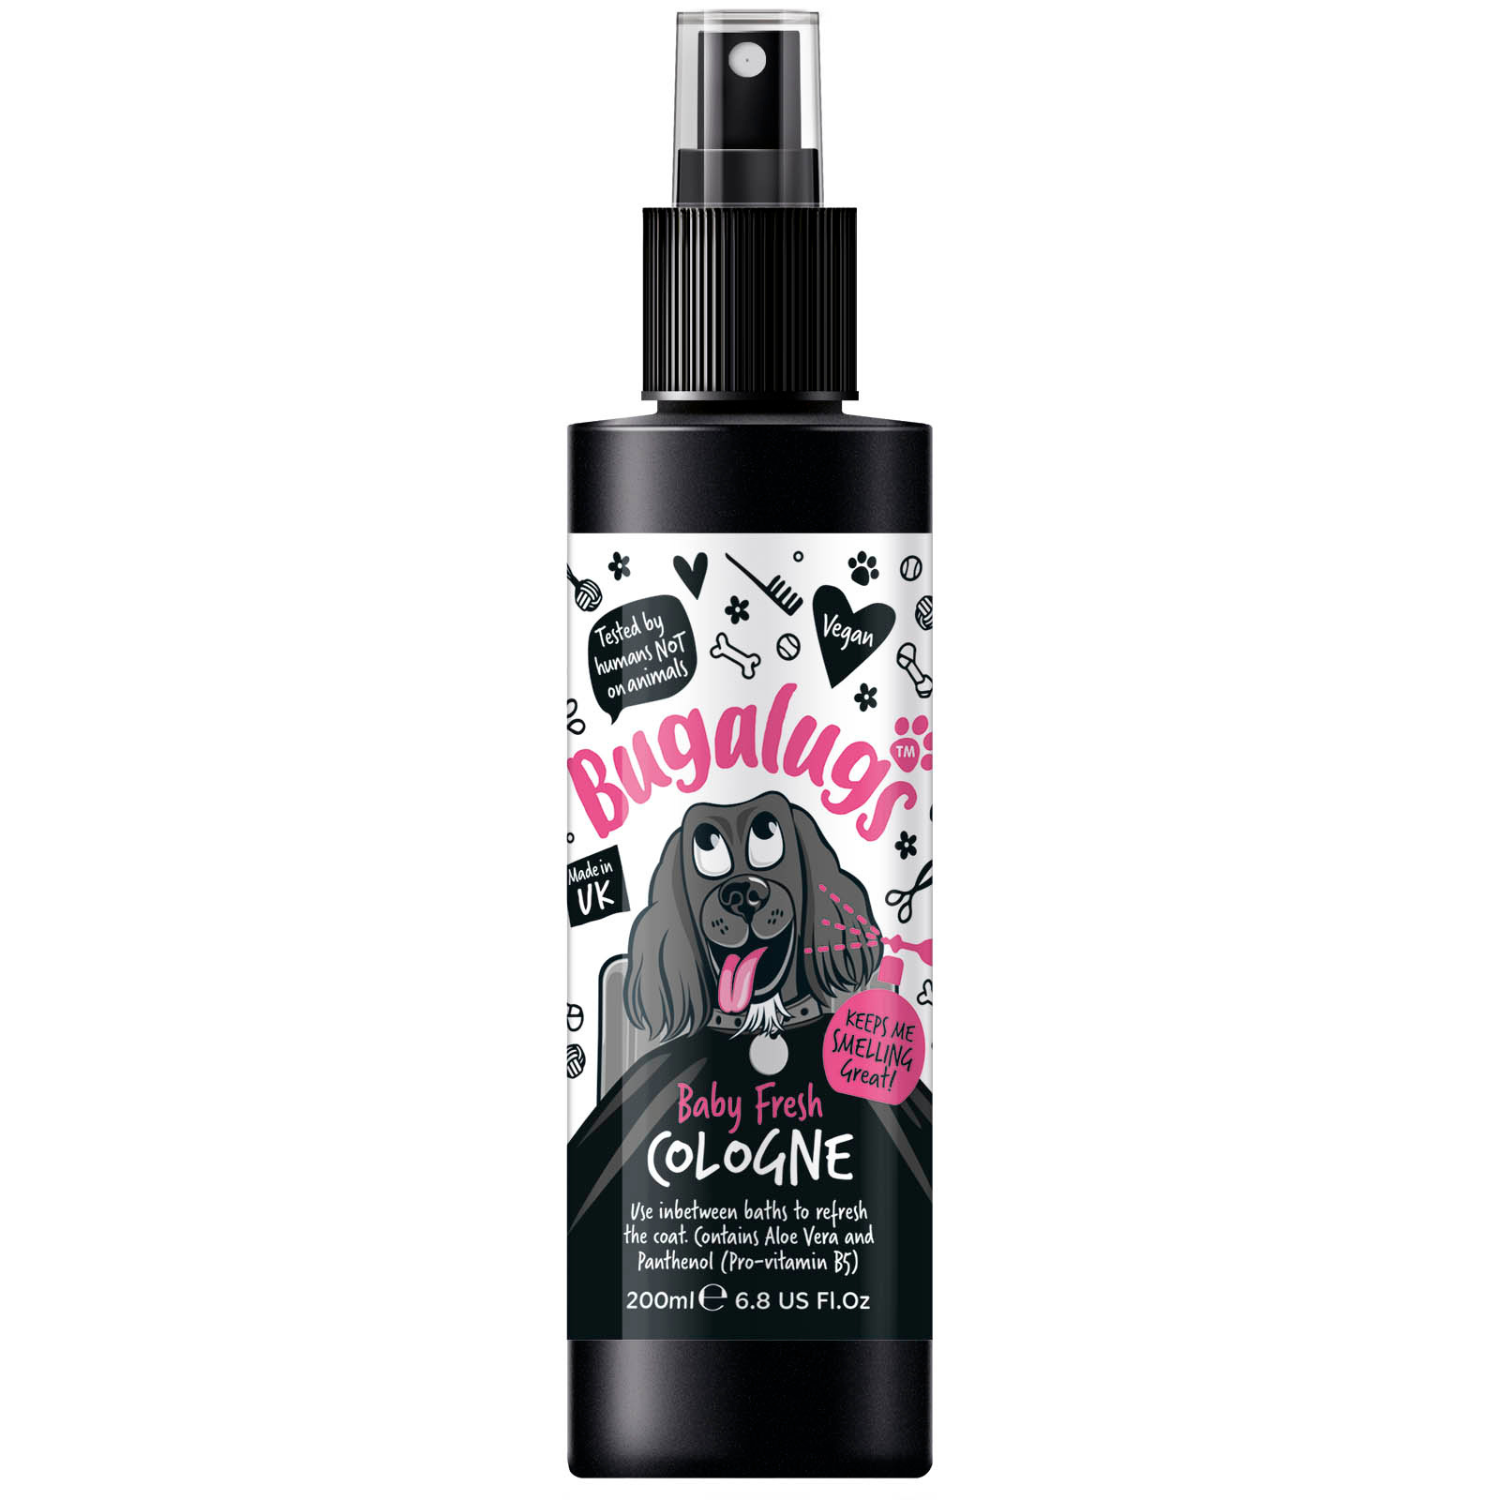 Bugalugs Baby Fresh Cologne - Dog cologne for dogs and puppies